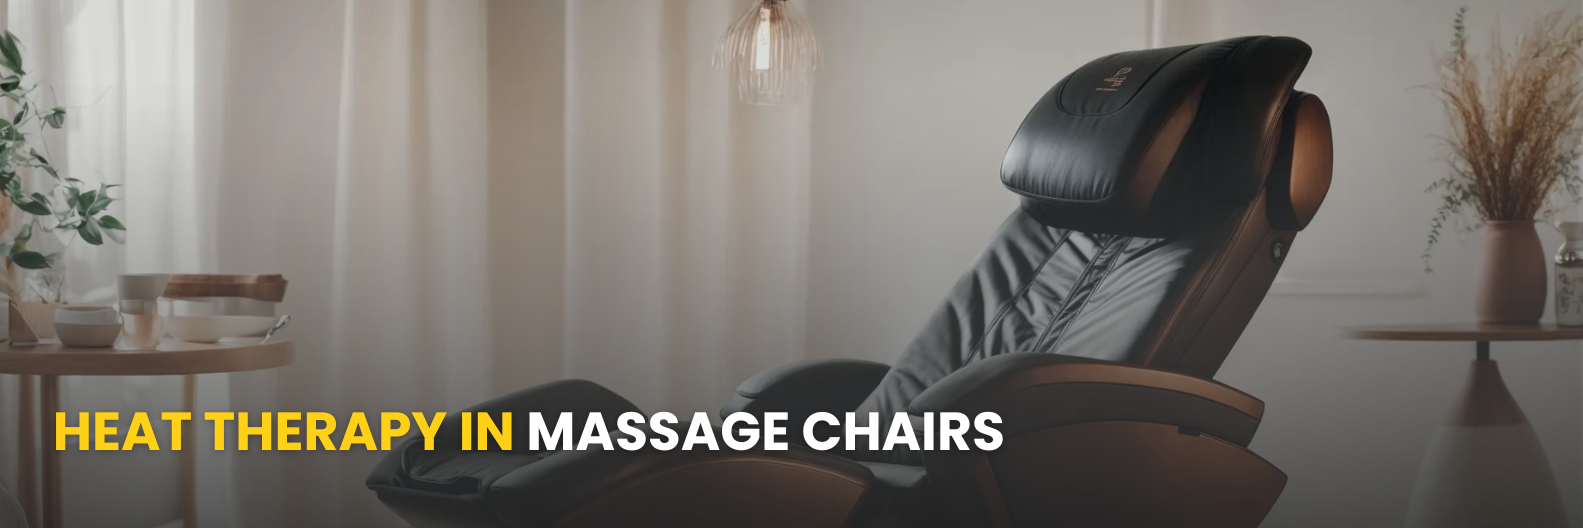 Explore heat therapy in massage chairs. Shop Osaki, Luraco, Japanese 4D, and Infinity models on sale.